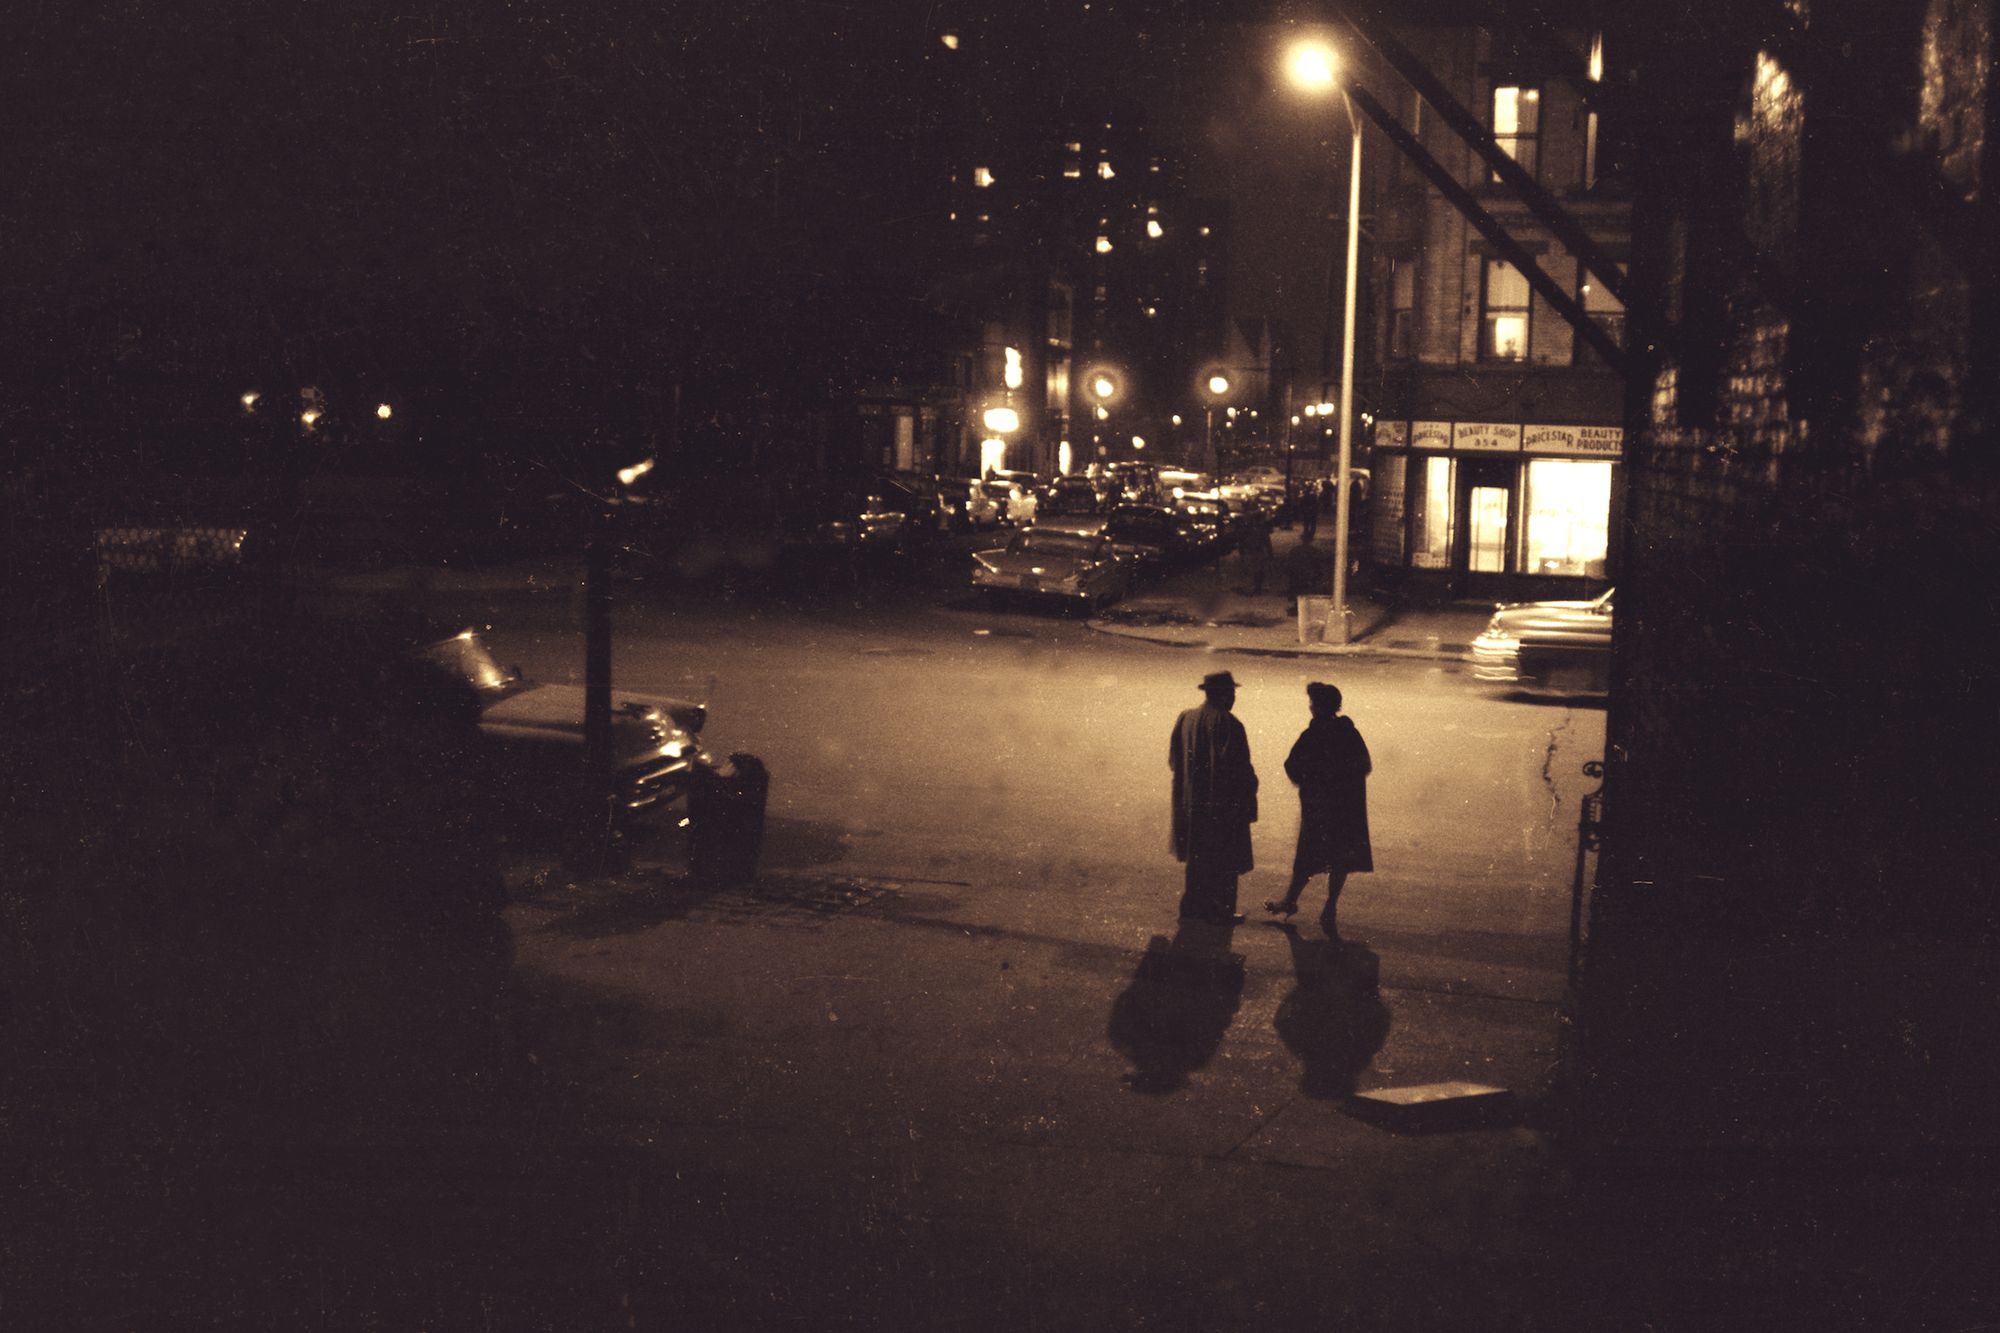 Black and white image of two figures on the street at night